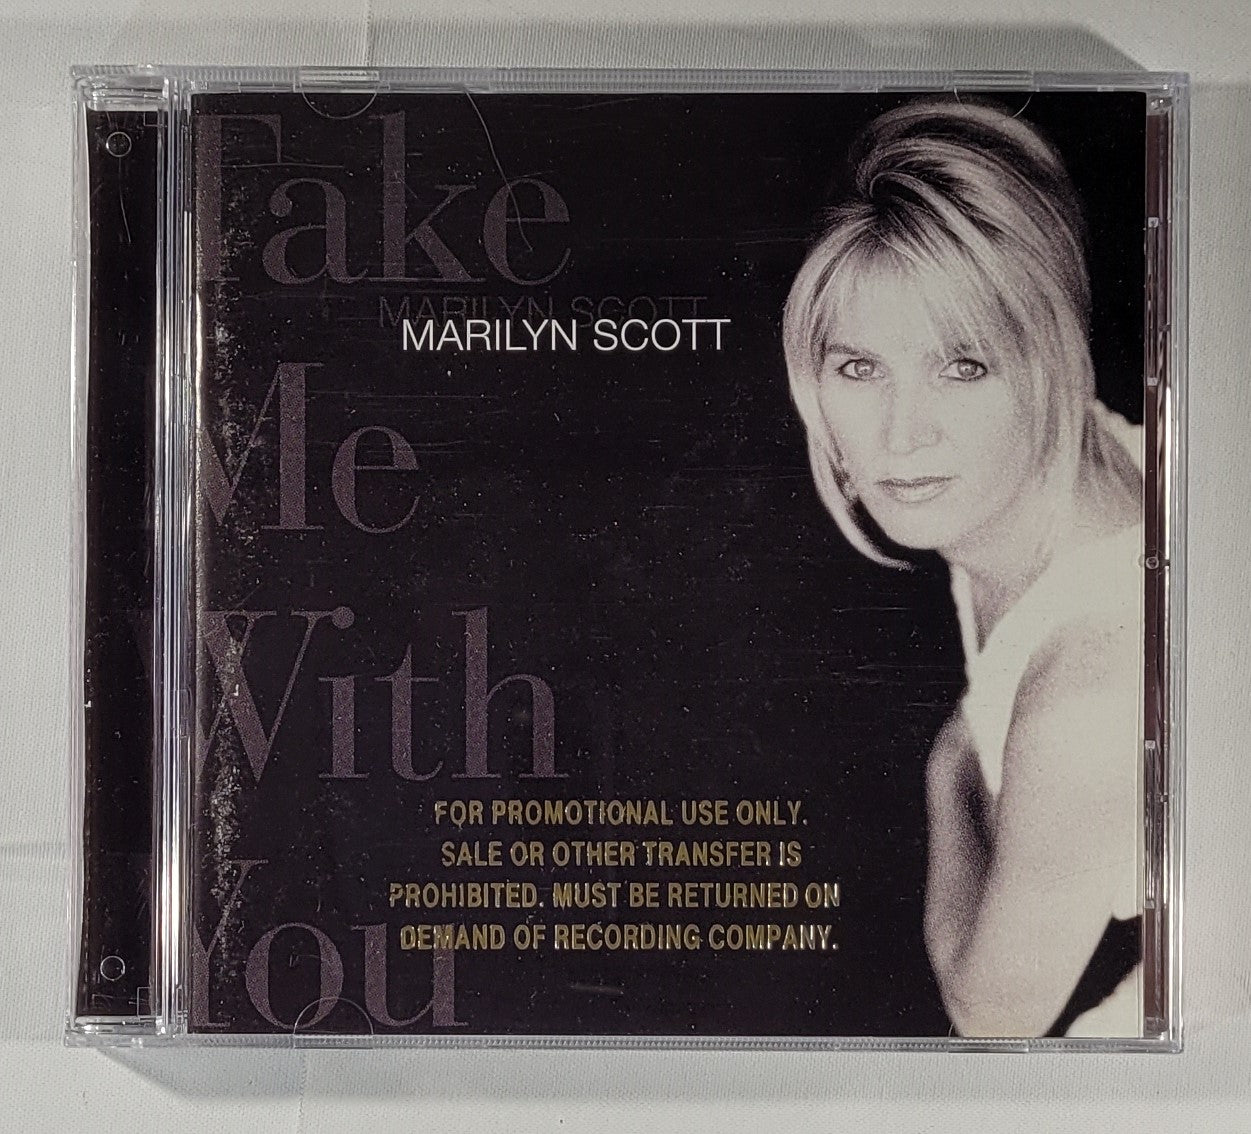 Marilyn Scott - Take Me With You [1996 Promo] [Used CD]